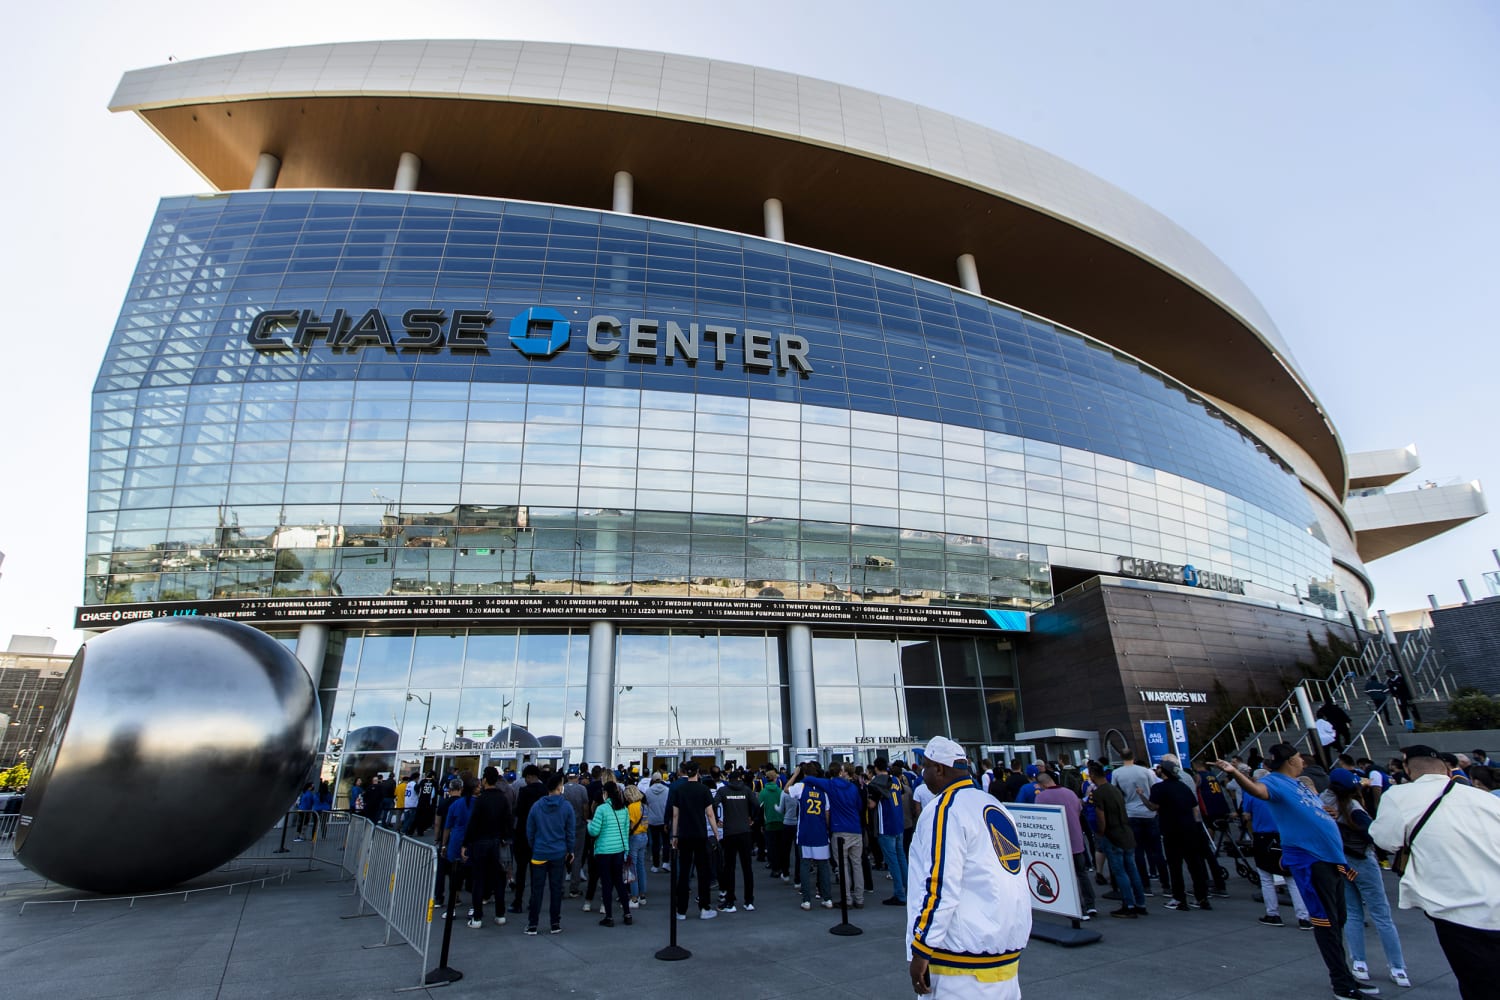 Warriors statement on Chase Center events